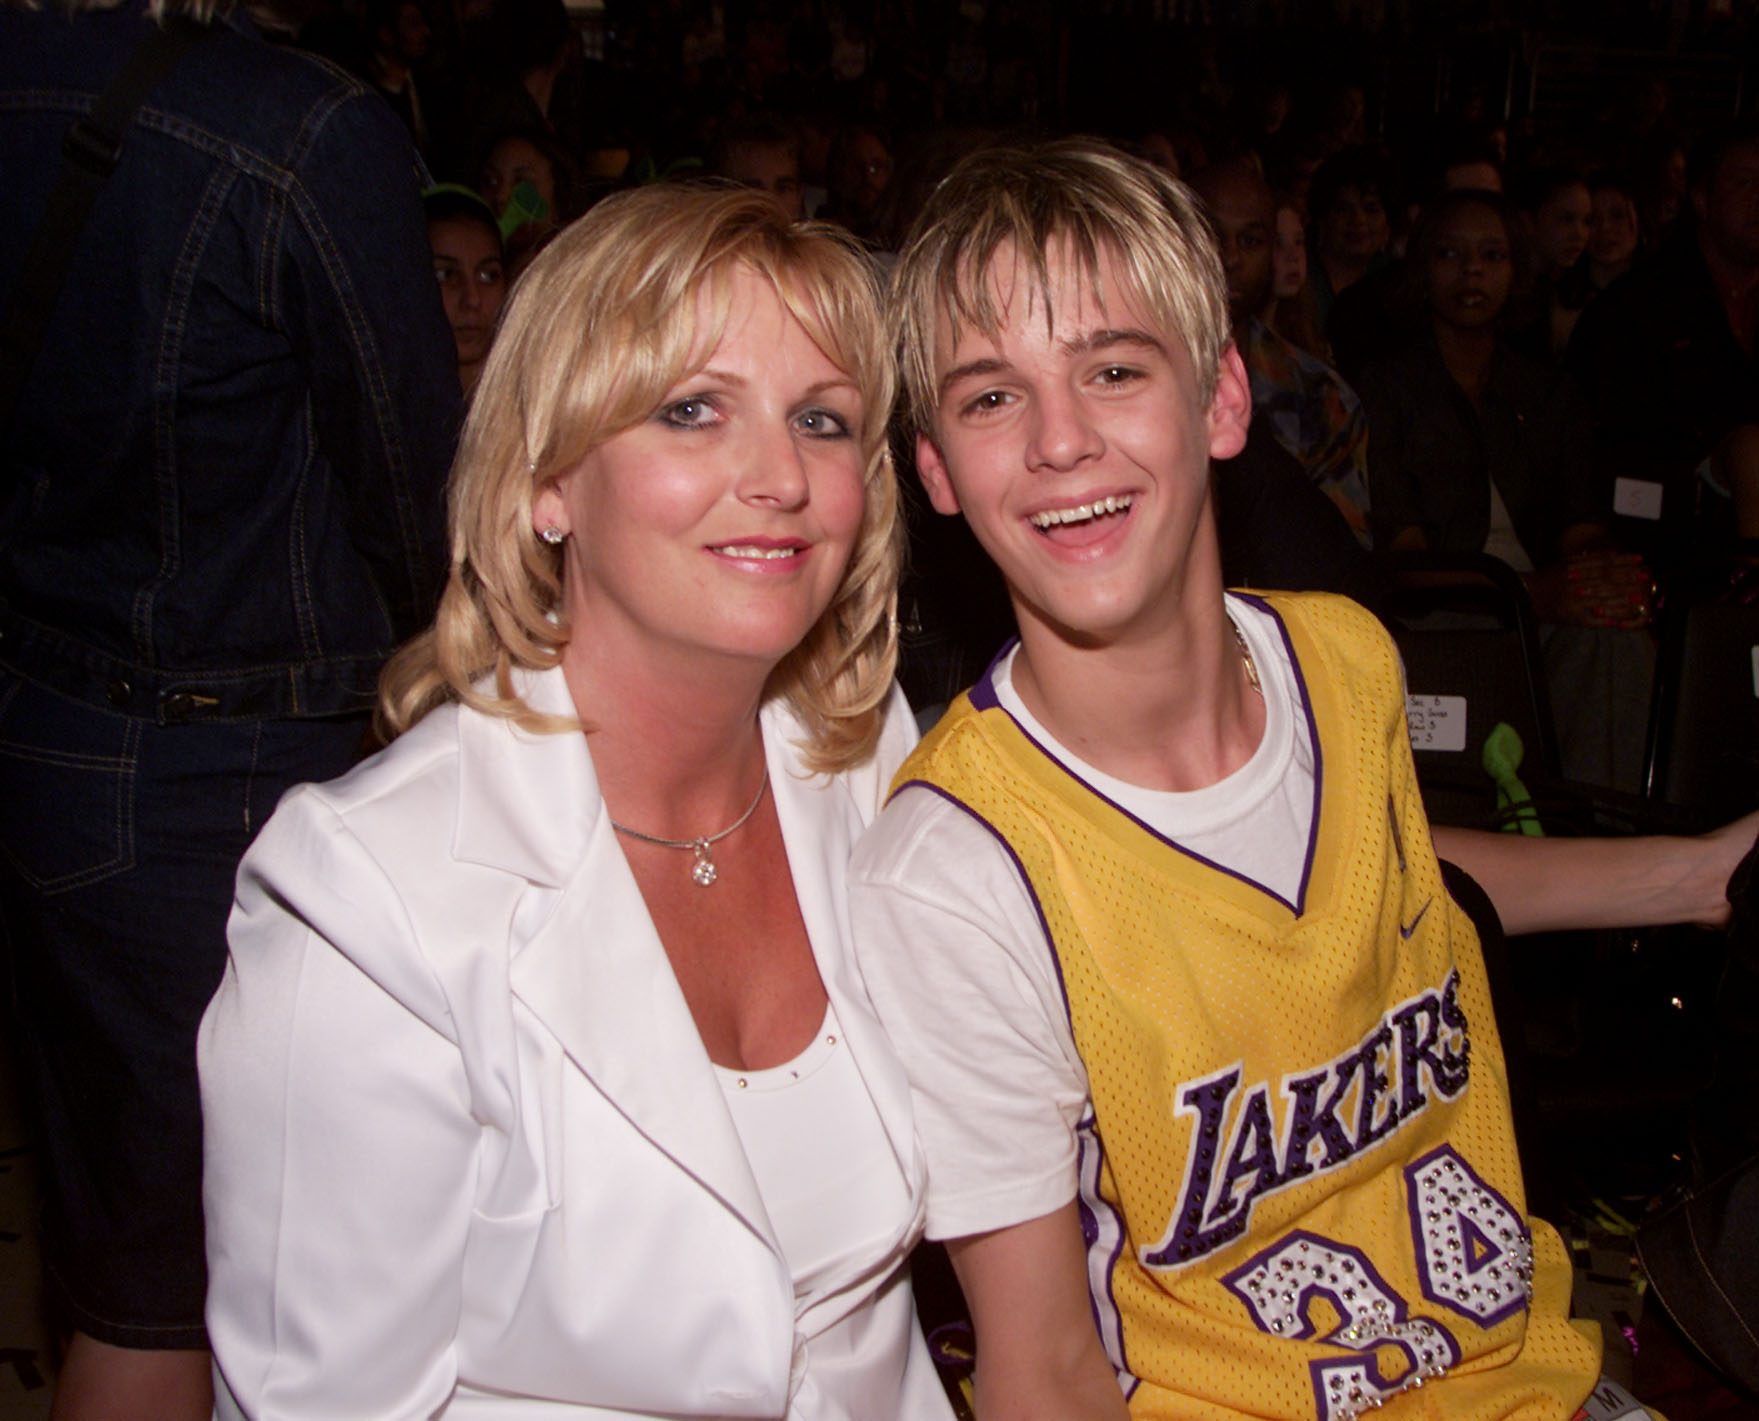 Aaron Carter and mother June Carter at the Nickelodeon's 14th Annual Kids' Choice Awards on April 21, 2001 | Source: Getty Images